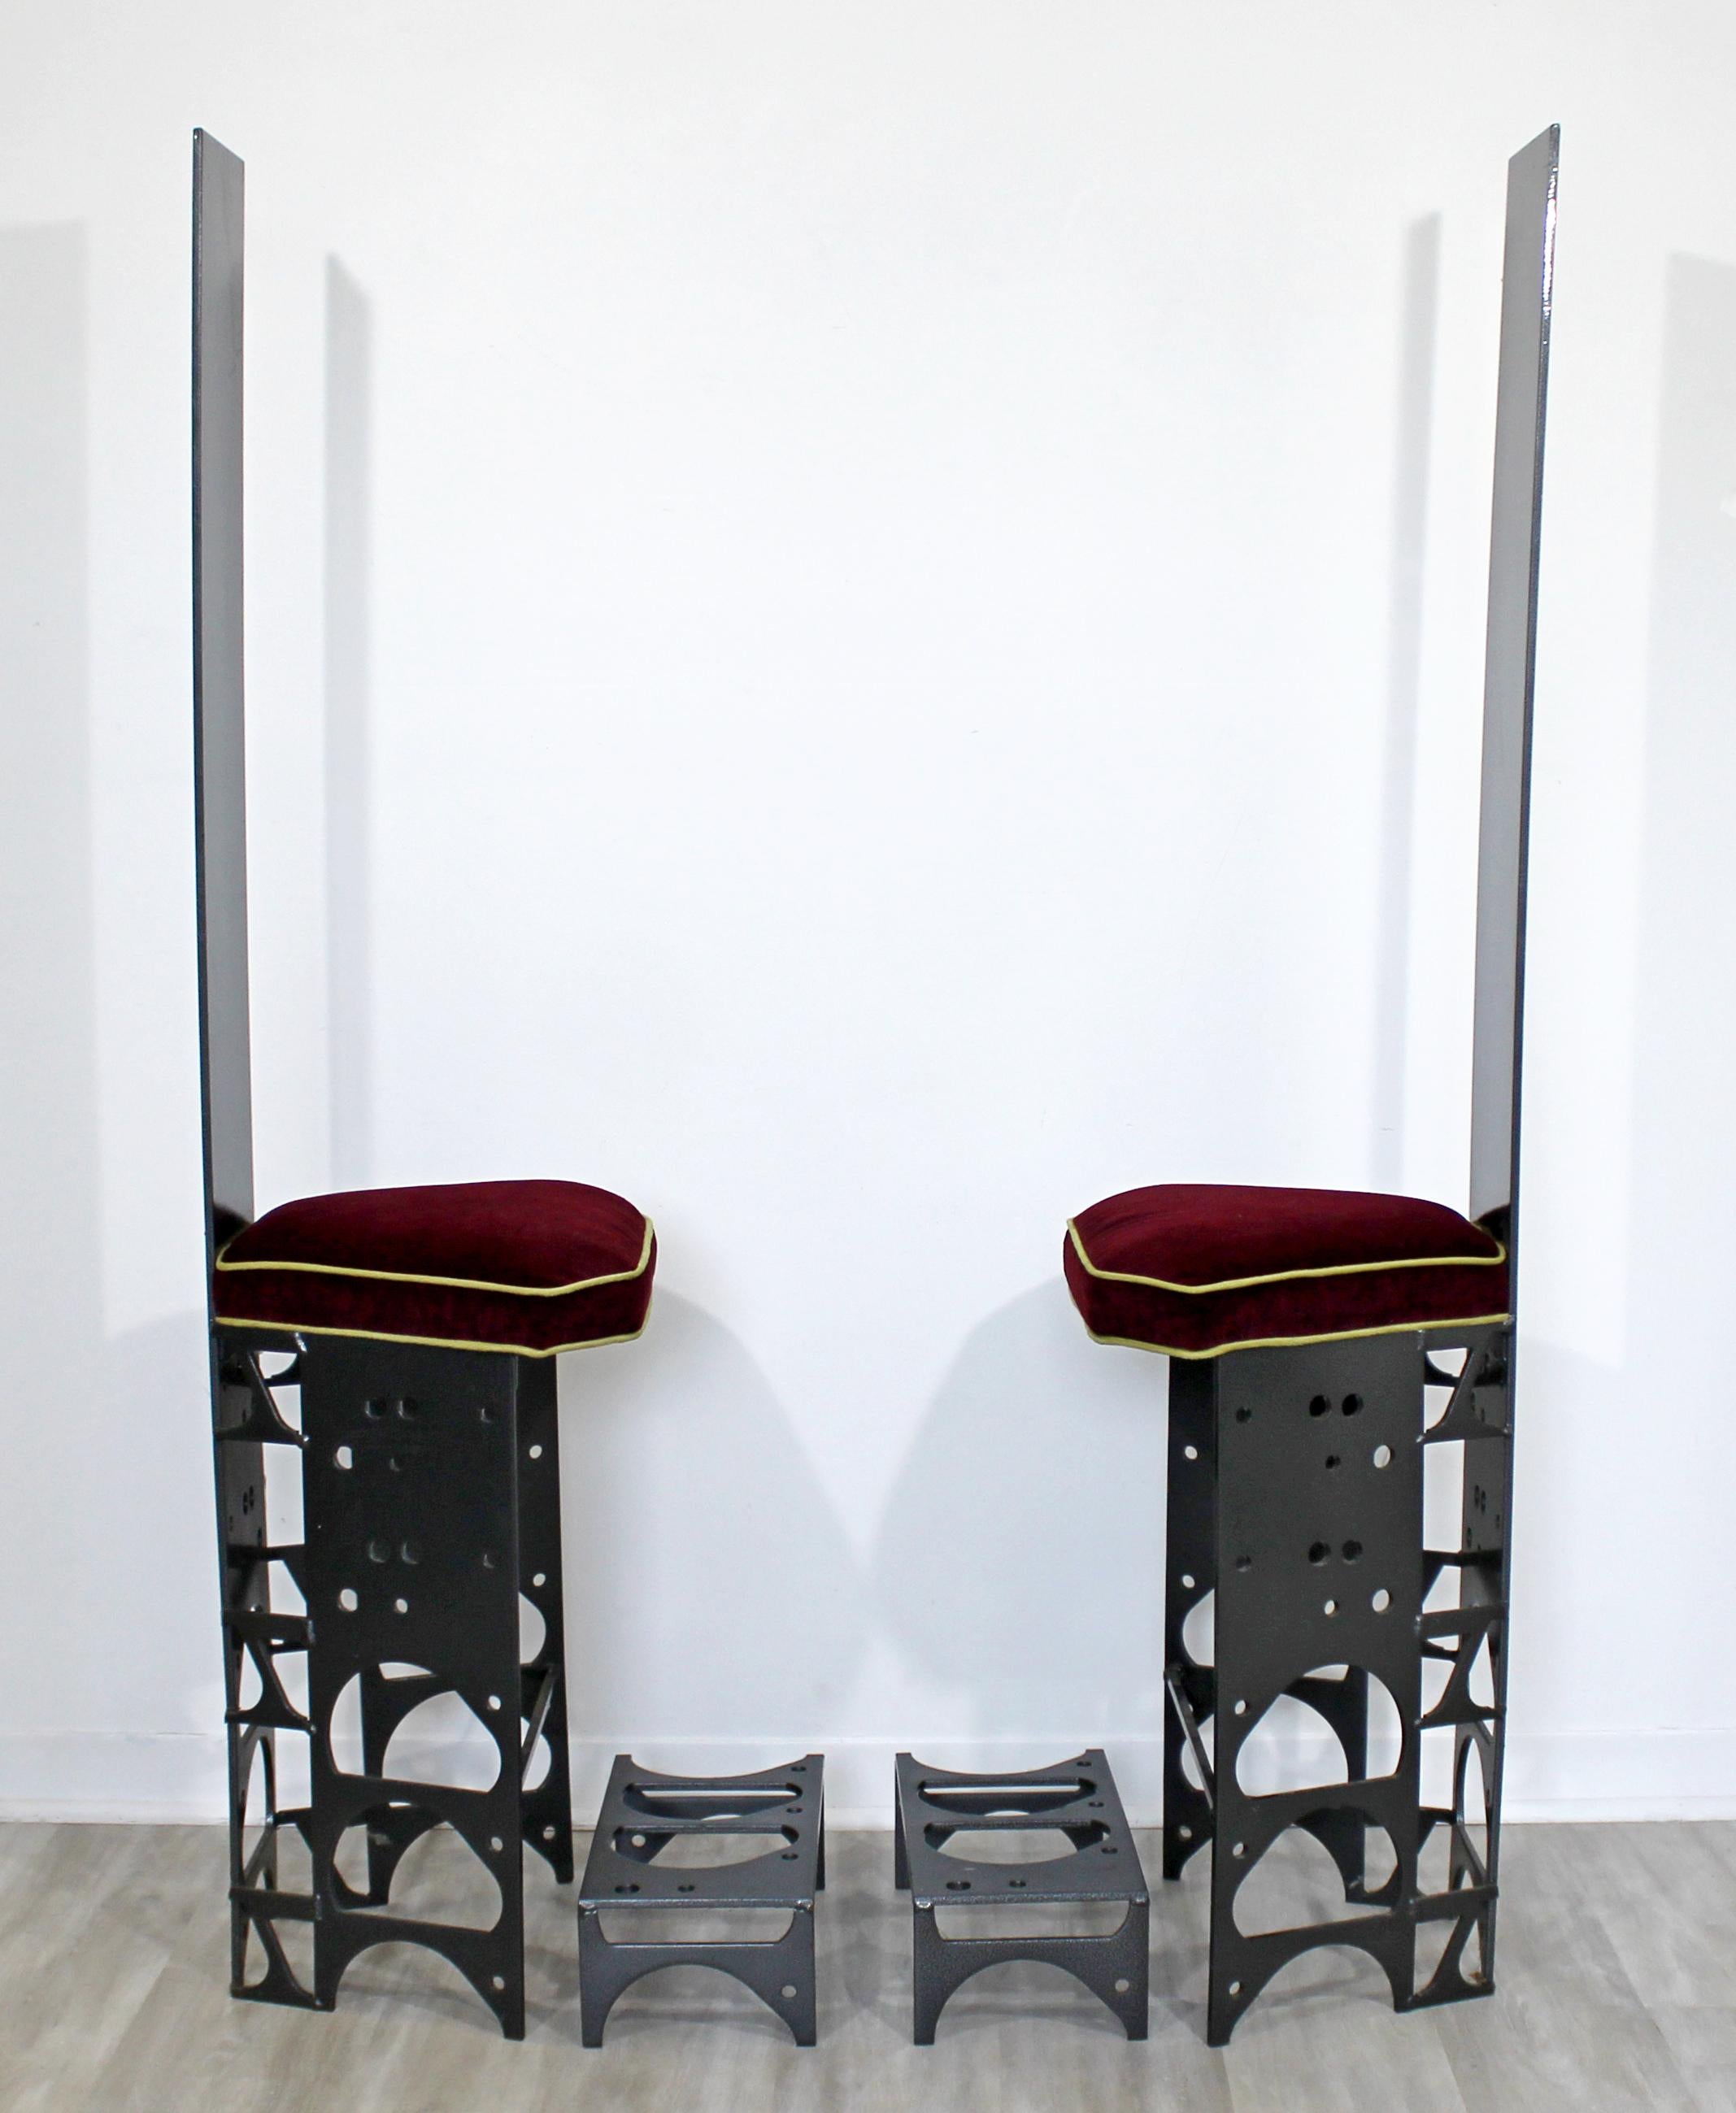 20th Century Contemporary Modern Ironsworks King and Queen Pair of Iron Art Chairs & Ottomans